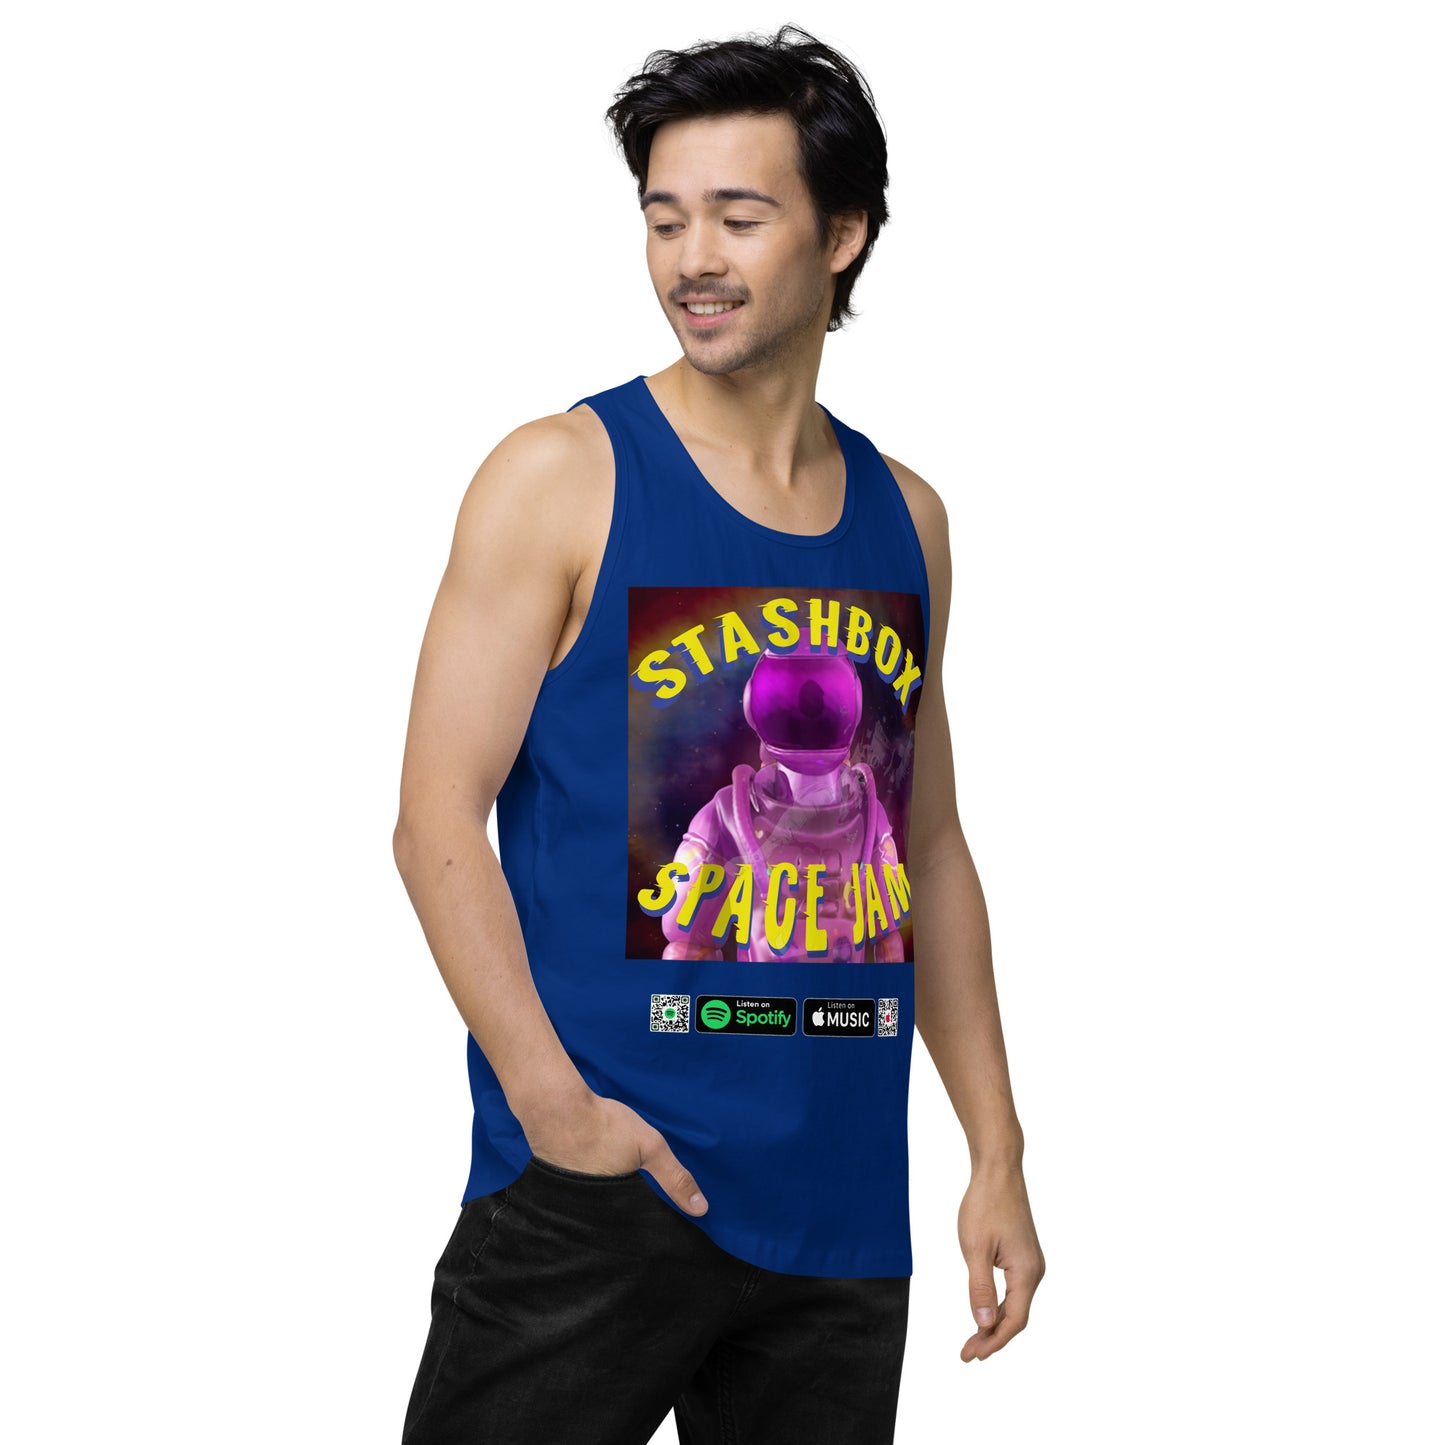 Stellar Wardrobe Addition: Space Jam - Stashbox Men’s Premium Tank Top, Design #005. Elevate your style with this cosmic tank top. Its captivating design blends art and astronomy, making it ideal for stargazers and fashion-forward individuals. #StashboxSpaceFashion #CelestialChic #GalacticComfort